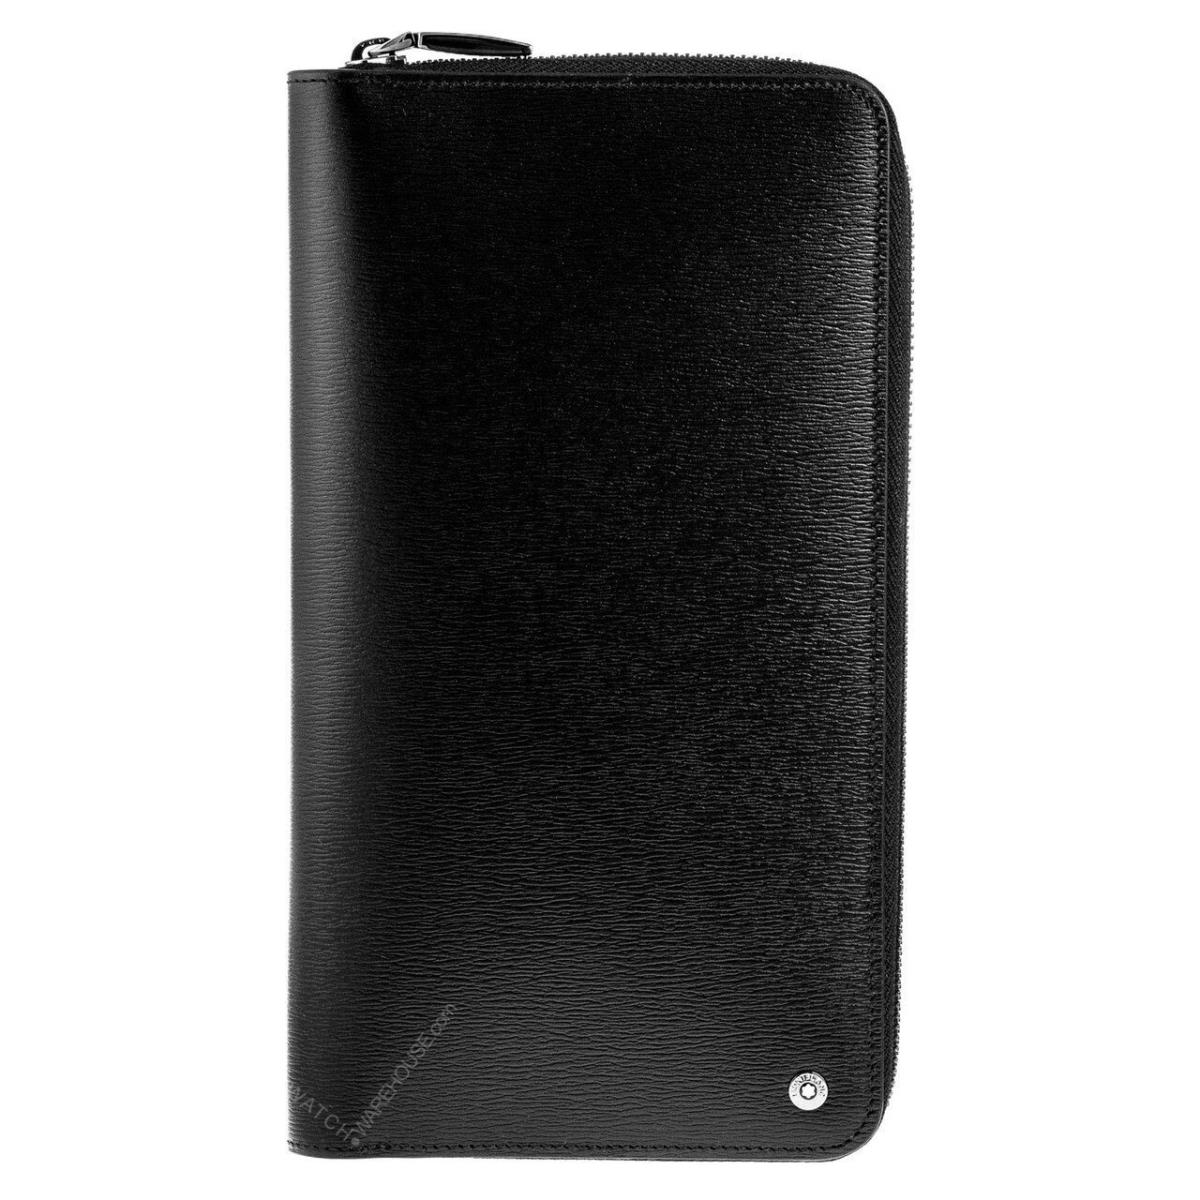 Montblanc Westside Collection Black Leather Long Wallet 114695